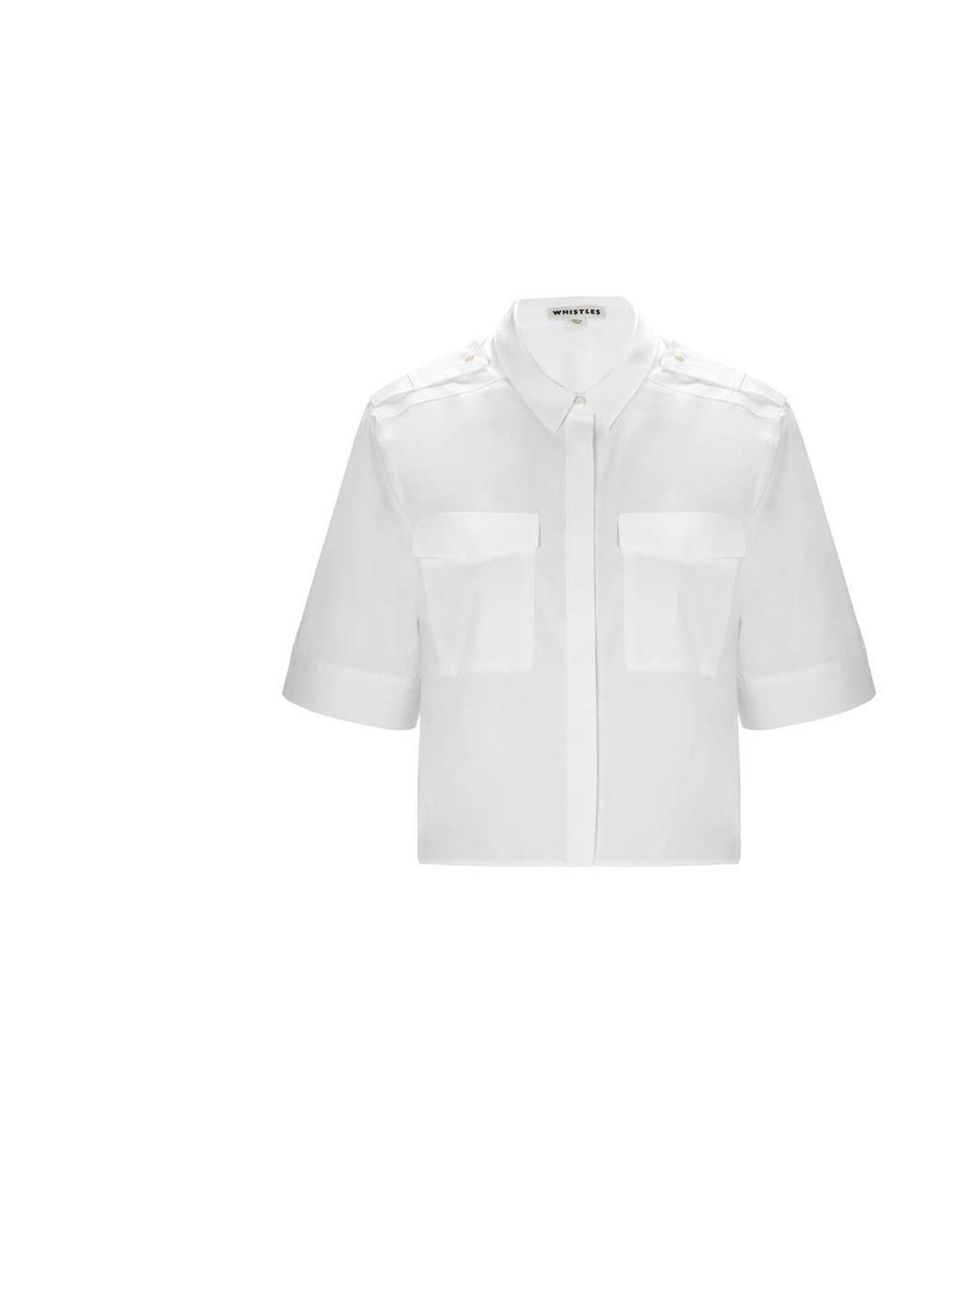 <p>A white shirt is a perfect blank canvas for any outfit.</p><p>Get this one from <a href="http://www.whistles.co.uk/fcp/categorylist/dept/new_in-tops?resetFilters=true">Whistles</a>, £115</p>